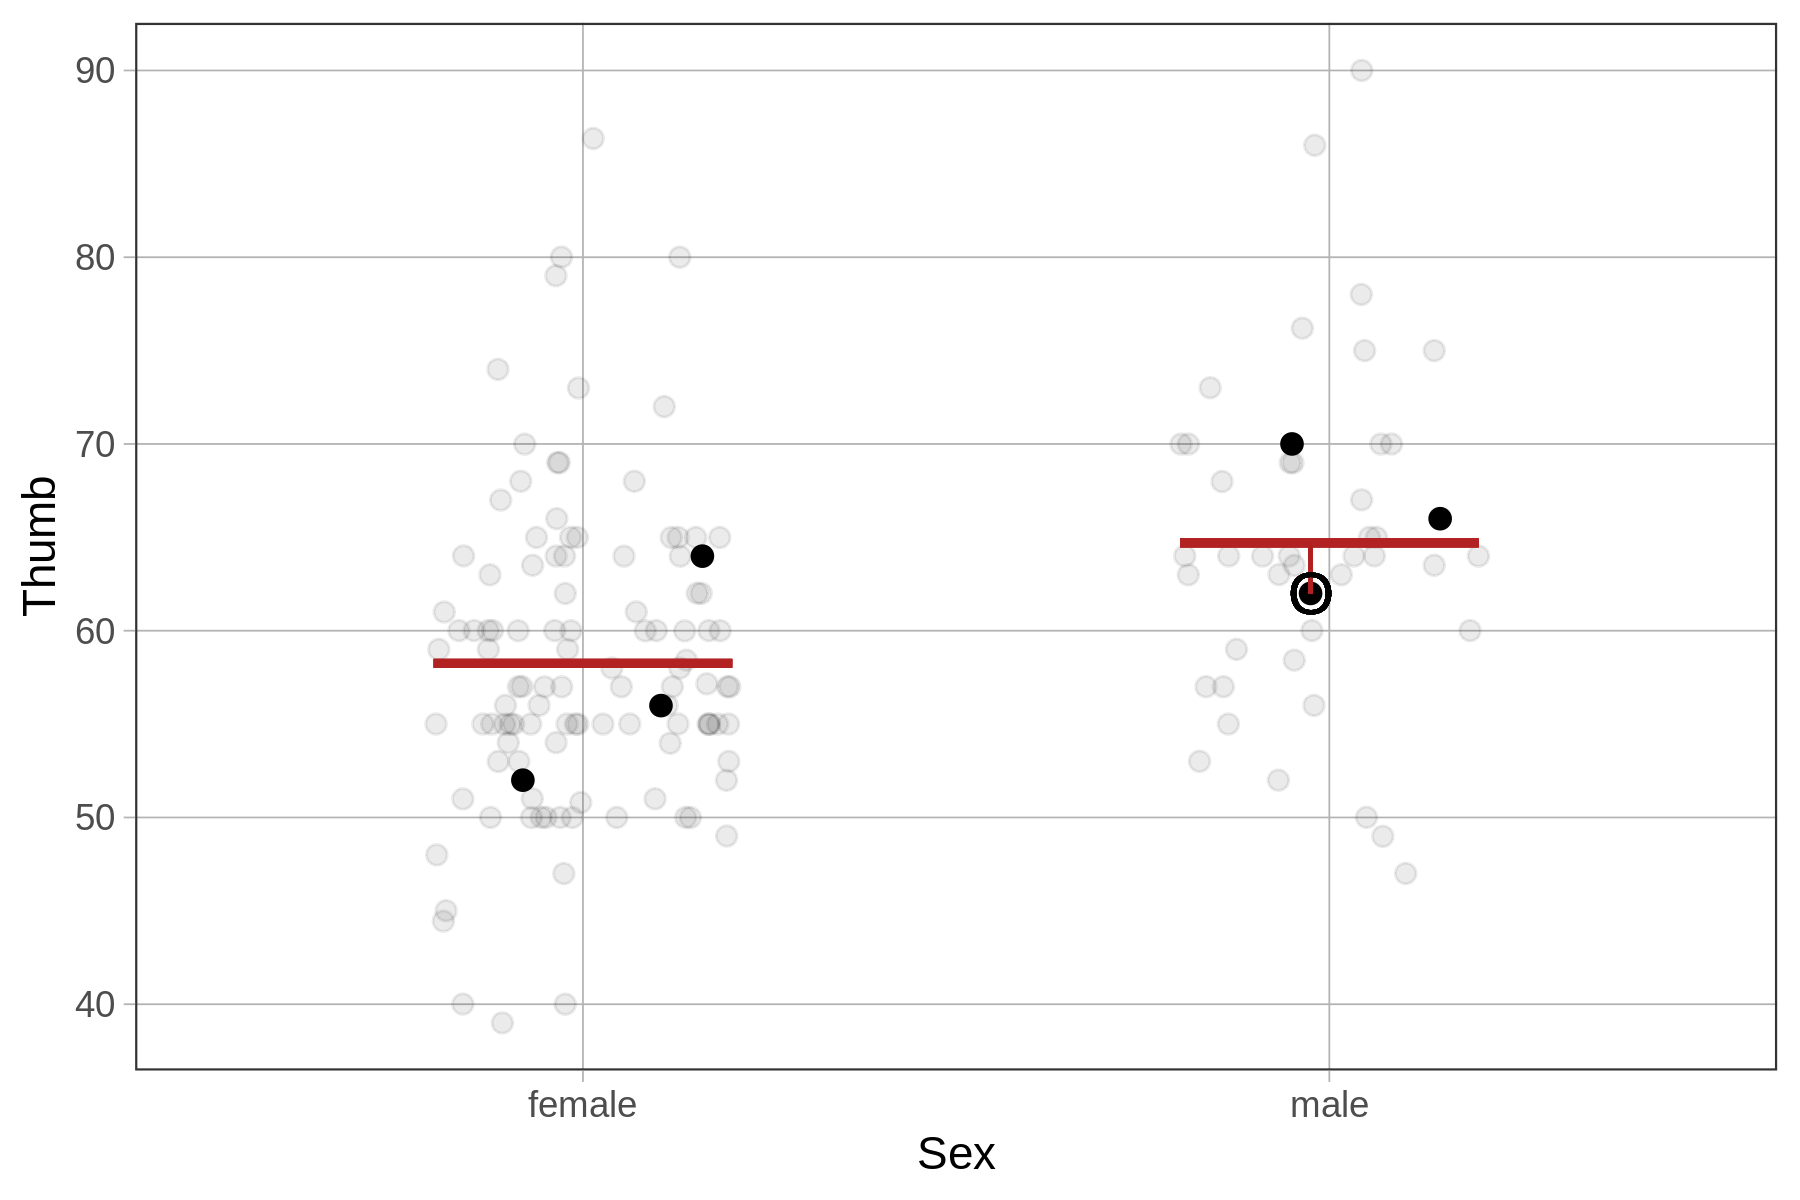 On the right, a jitter plot of the distribution of Thumb by Sex, overlaid with a red horizontal line in each group showing the group mean. The residual for the same data point as in the jitter plot on the left appears is now below the line for the male group.